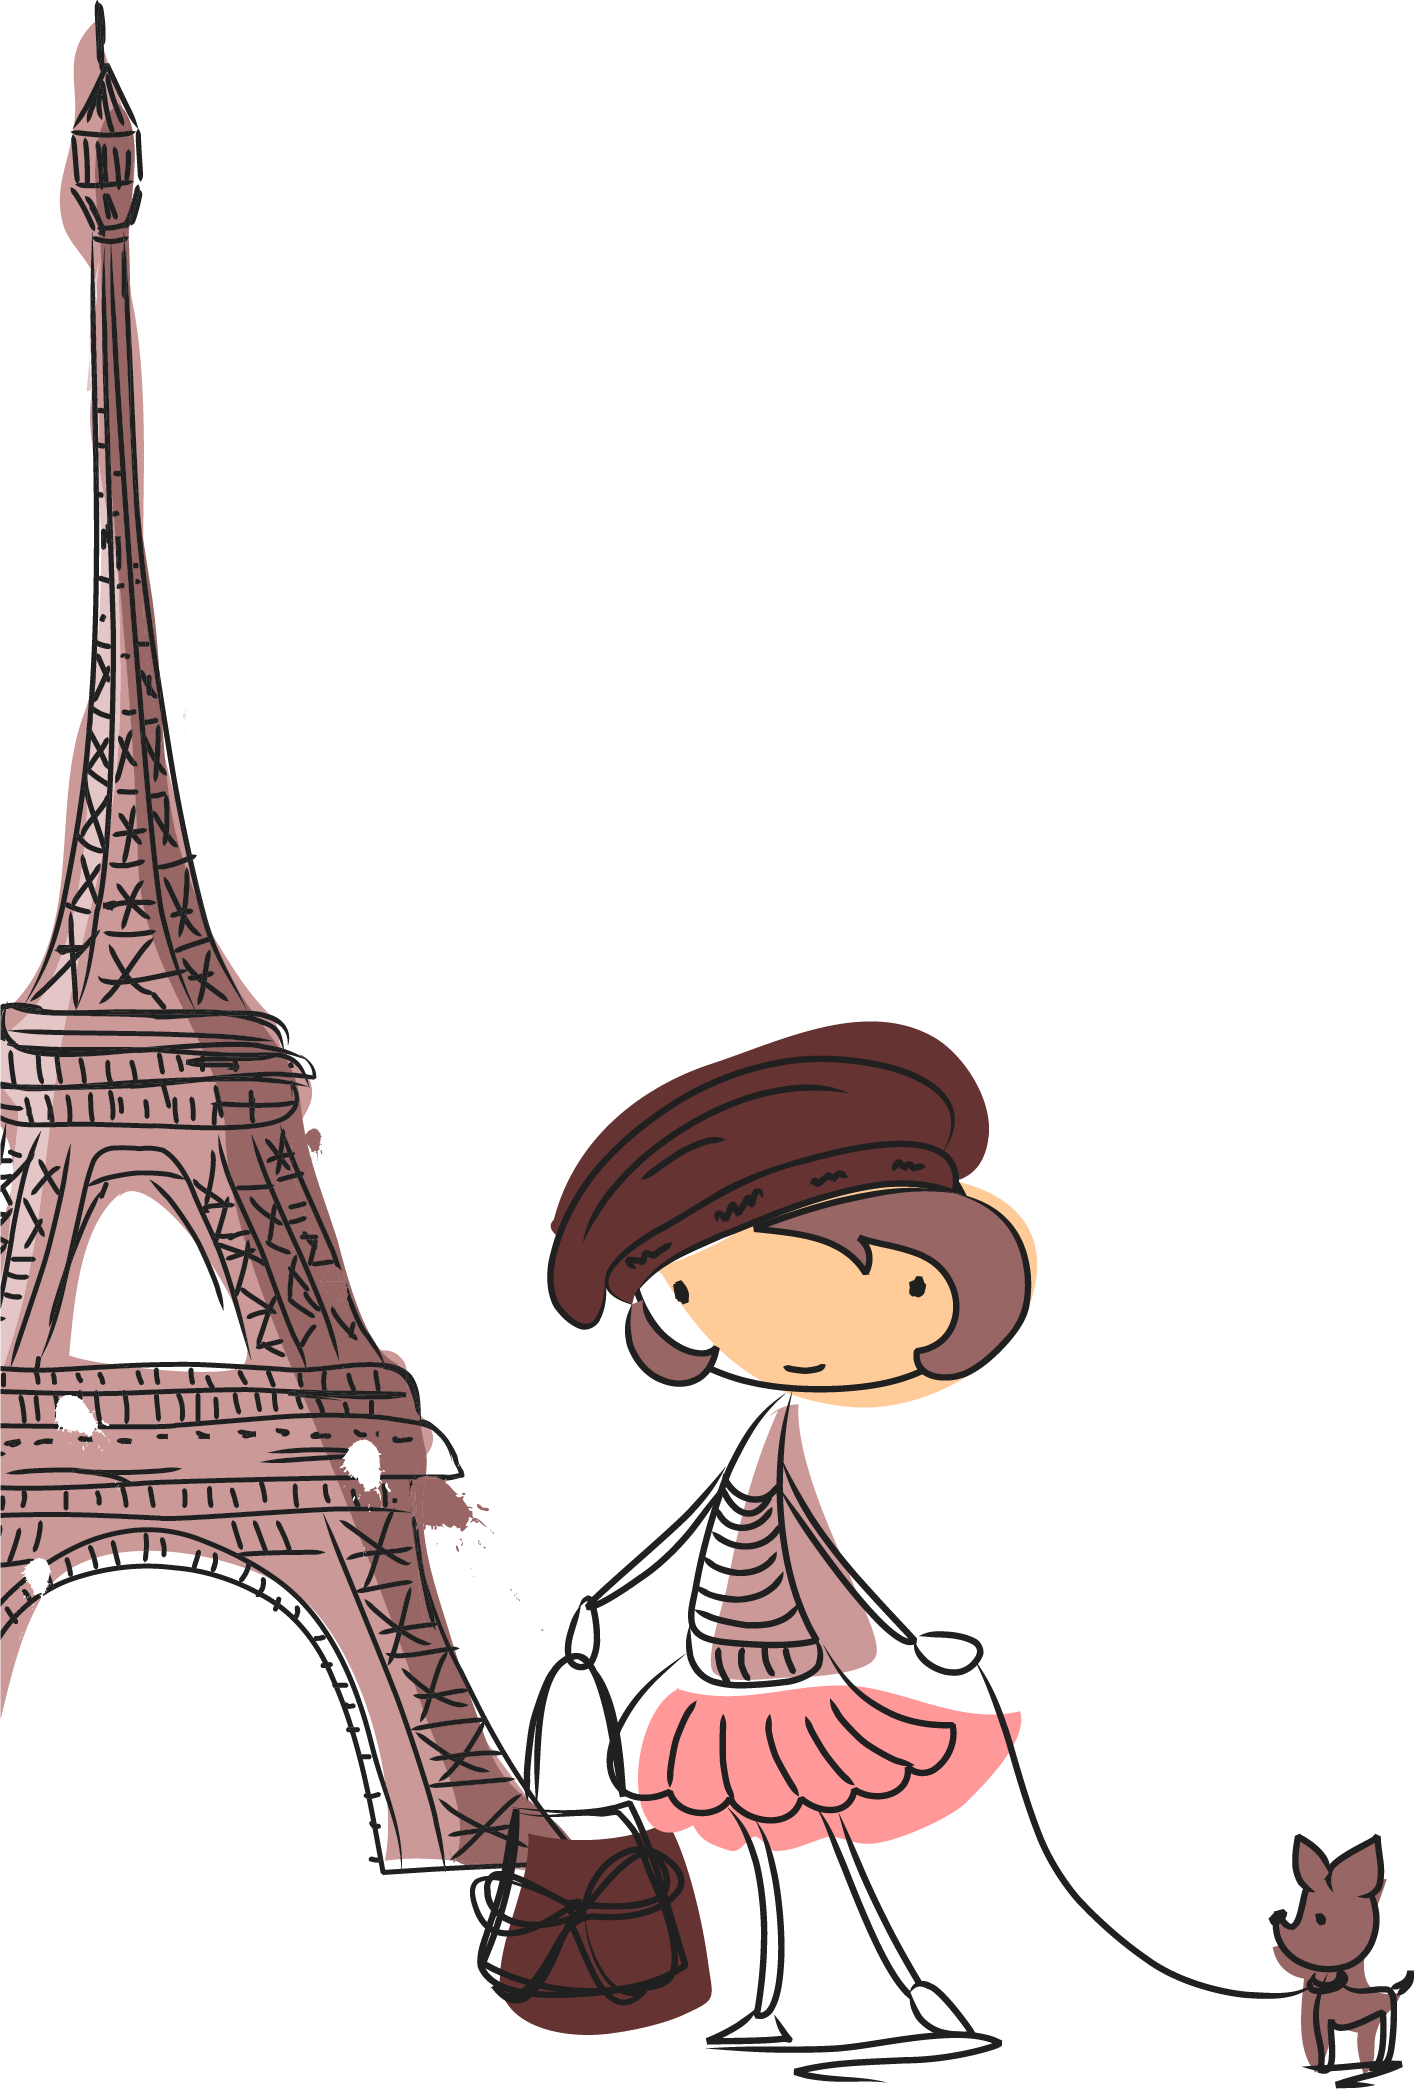 Eiffel Tower Drawing Cartoon Illustration - Mobile Cover For Iphone 6 And 6s Soft Back Case Cover (1415x2089)